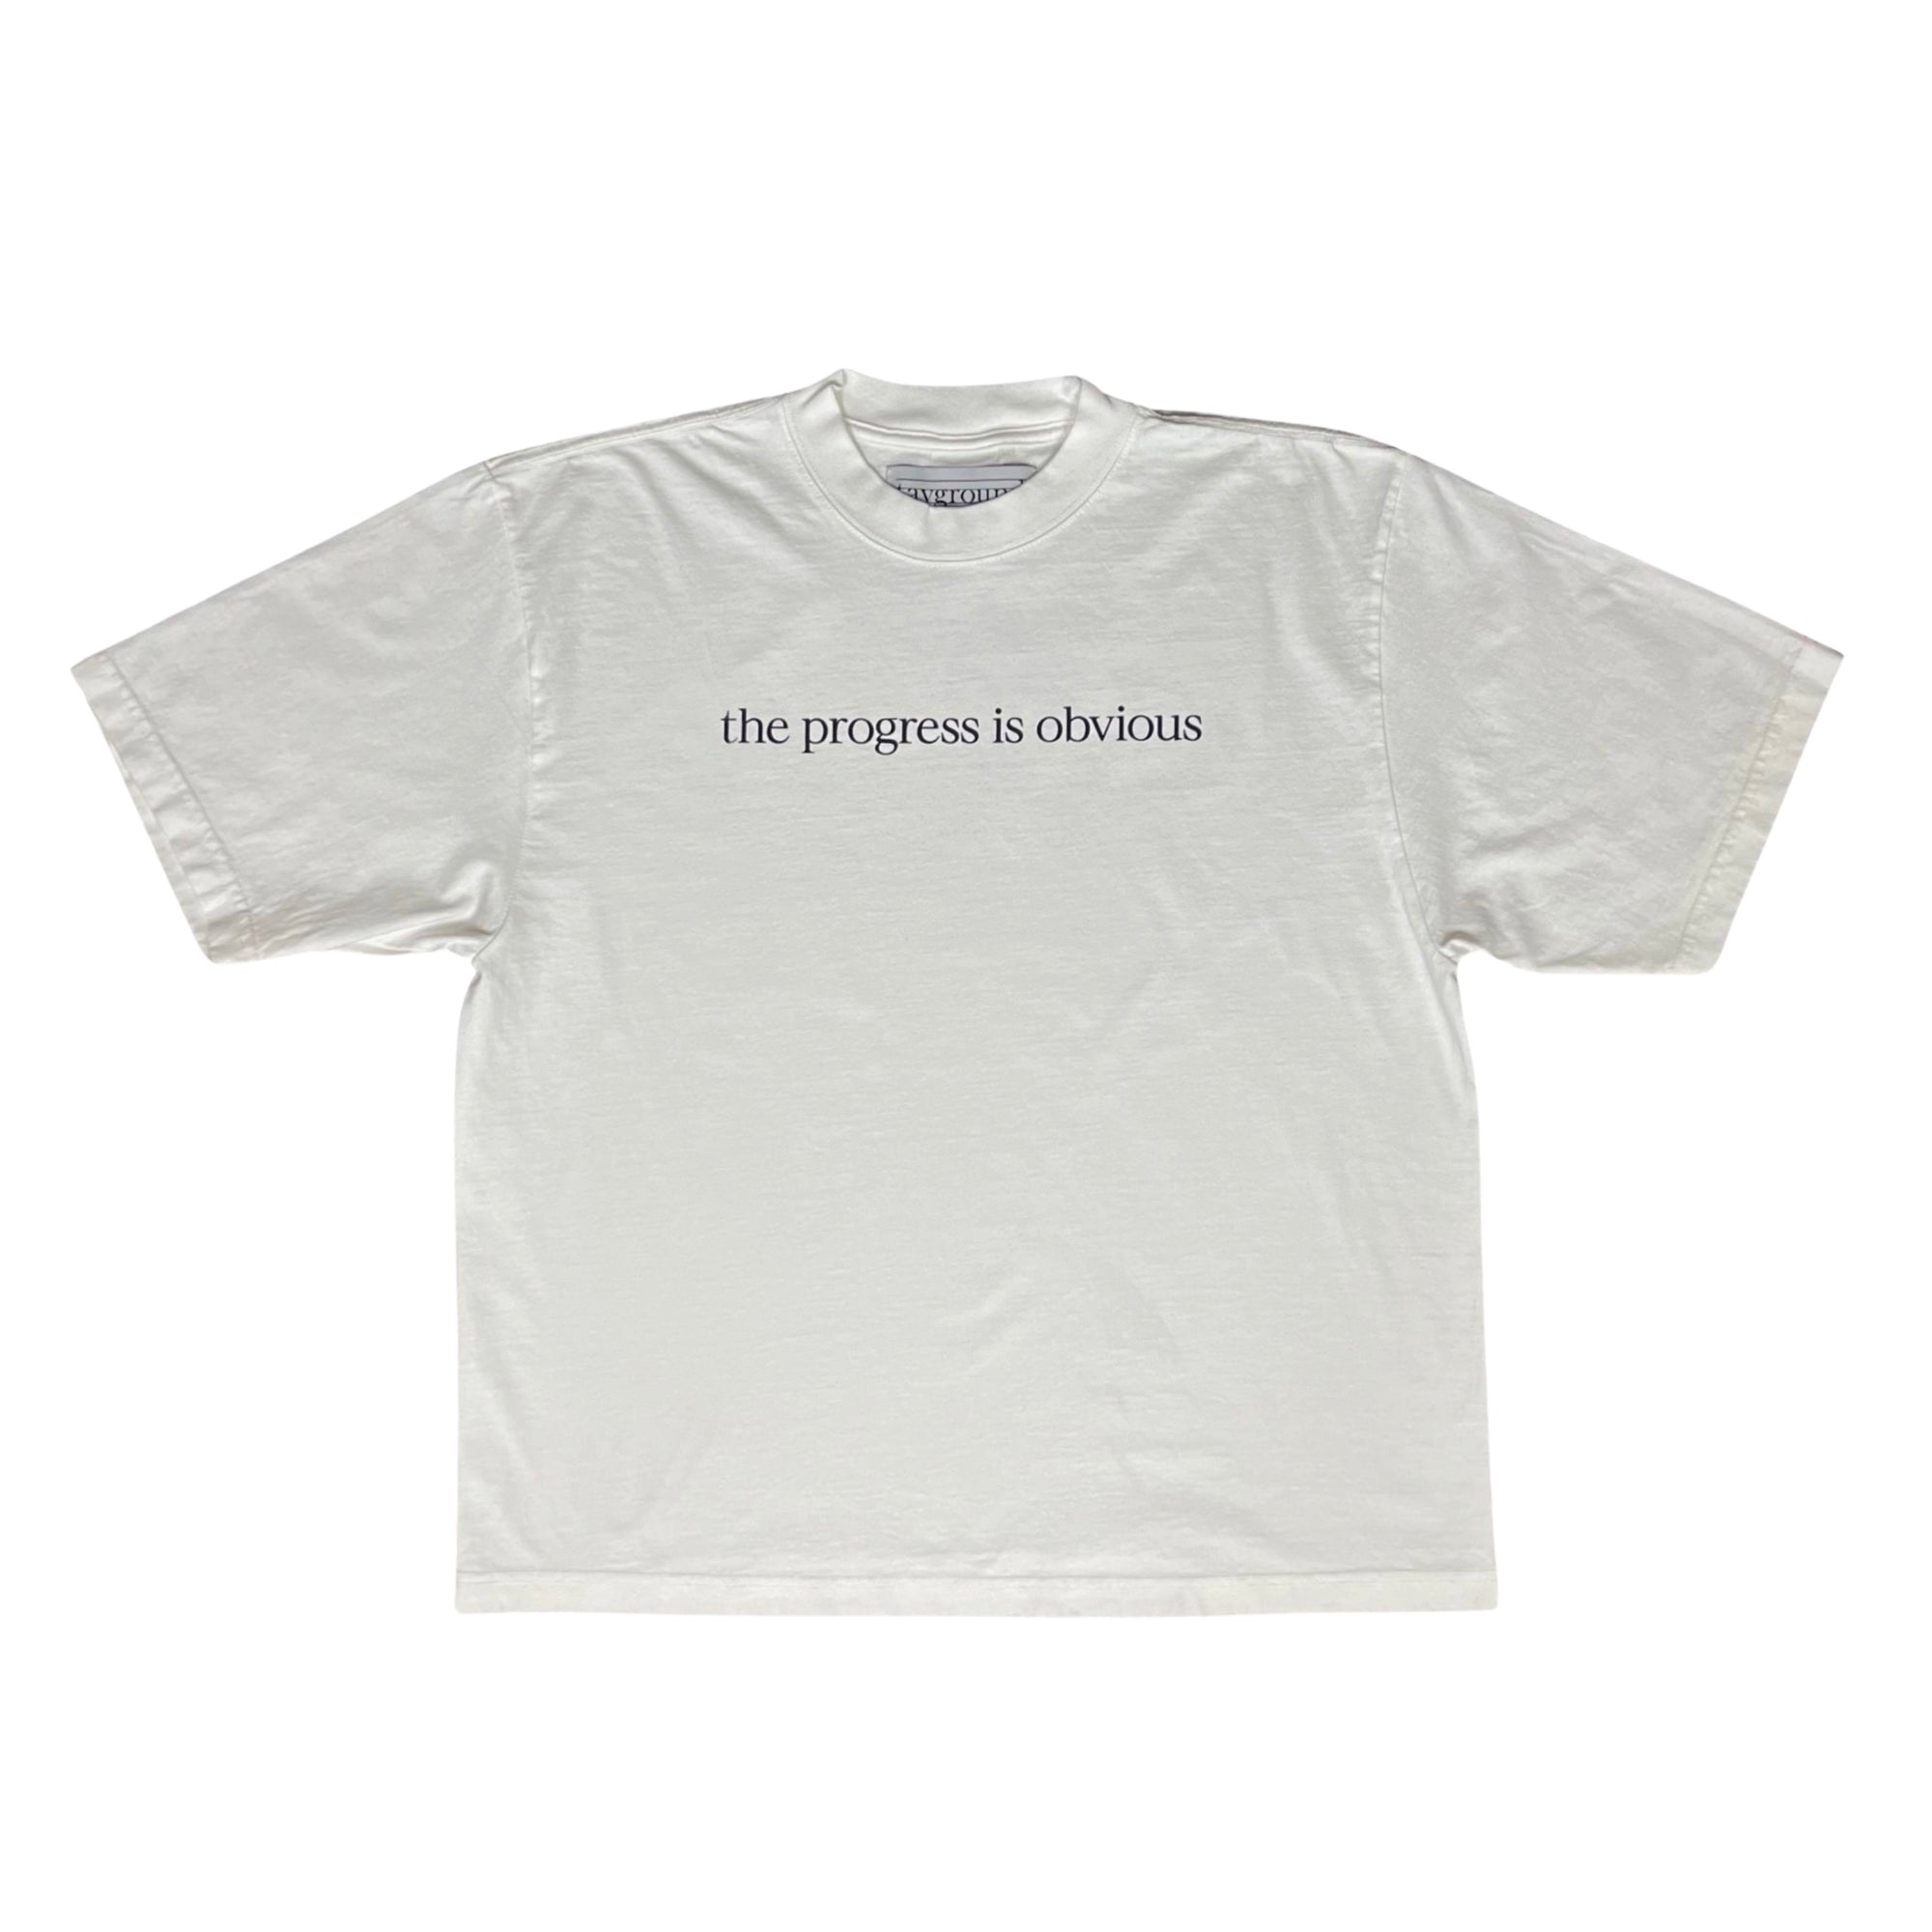 the progress is obvious T-Shirt